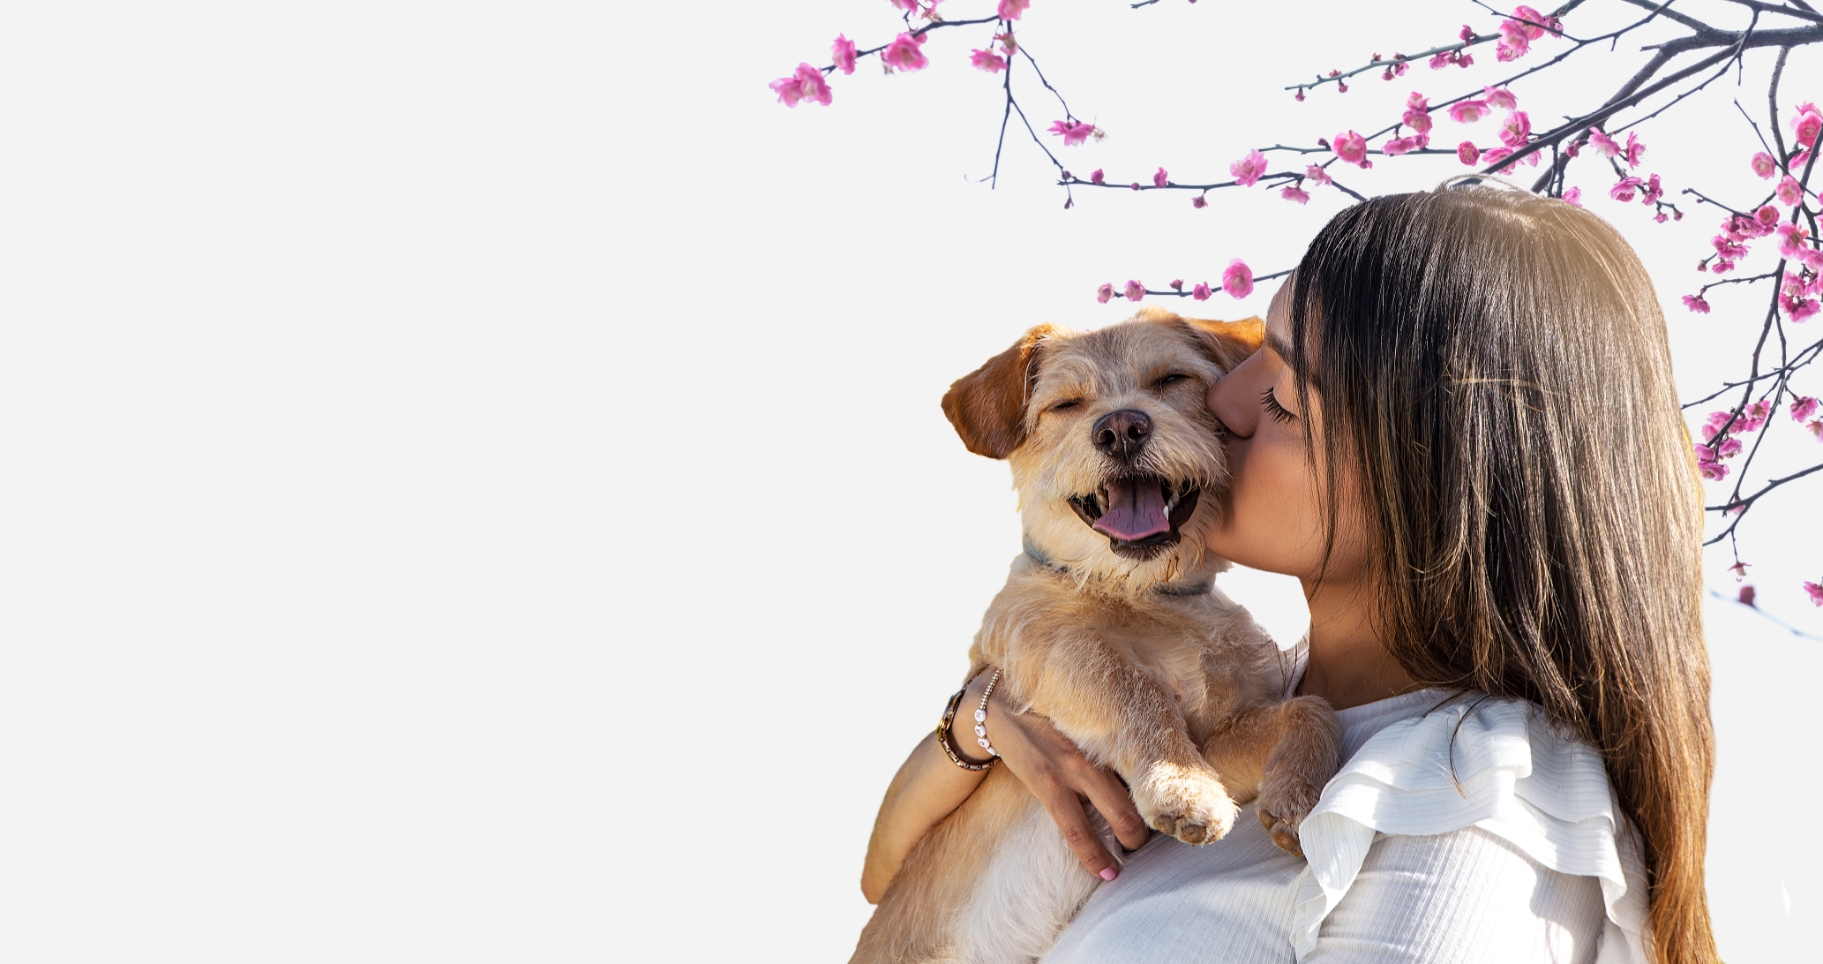 A puppy gets a little kiss from its owner under a blossoming tree